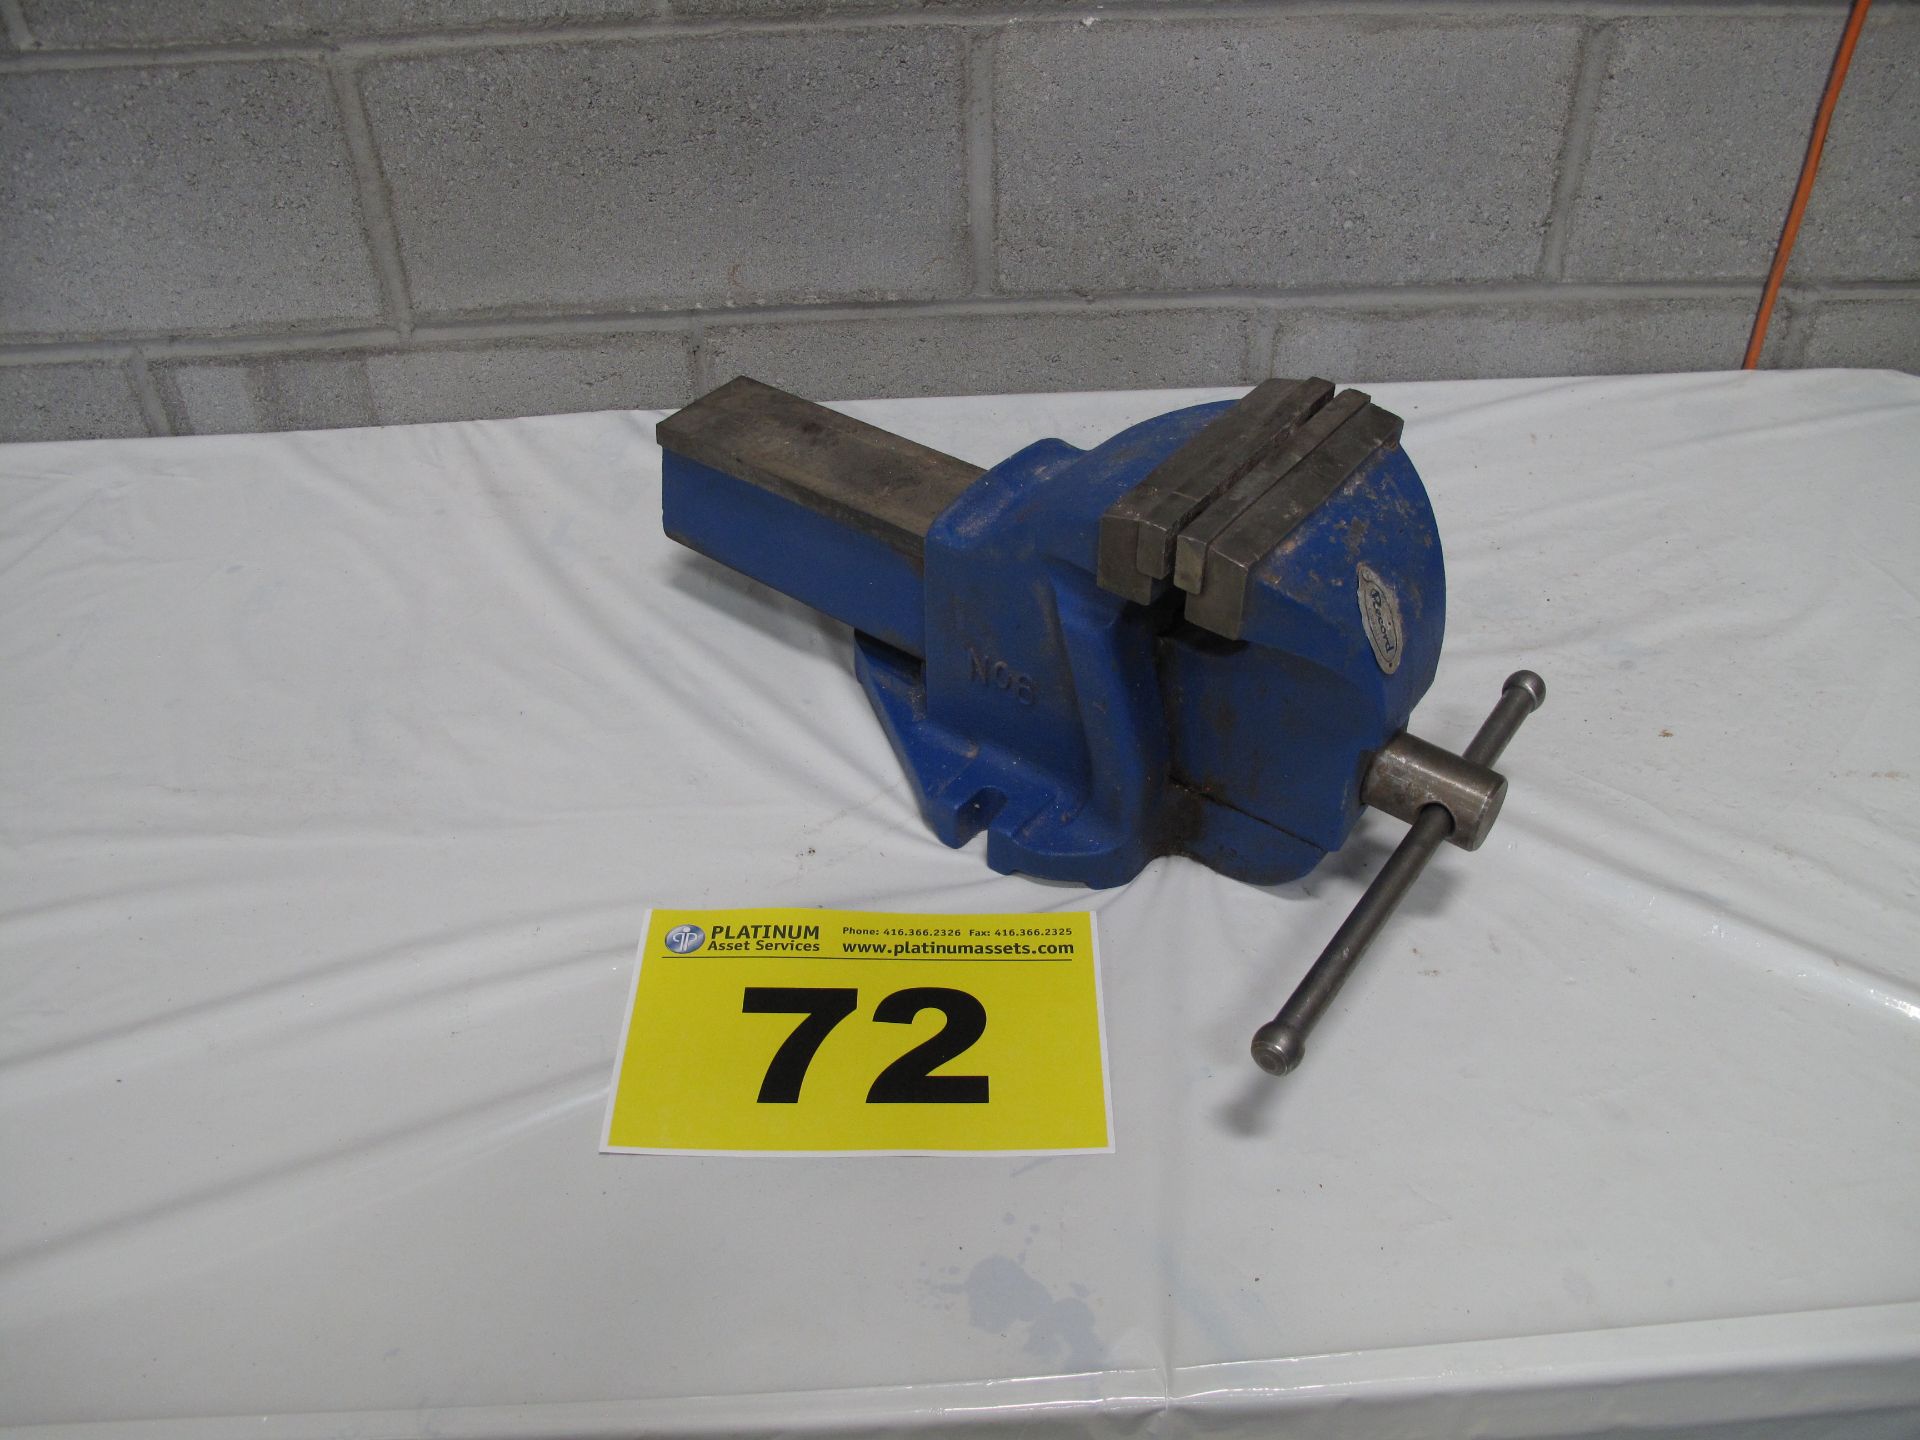 RECORD, 6", BENCH VICE